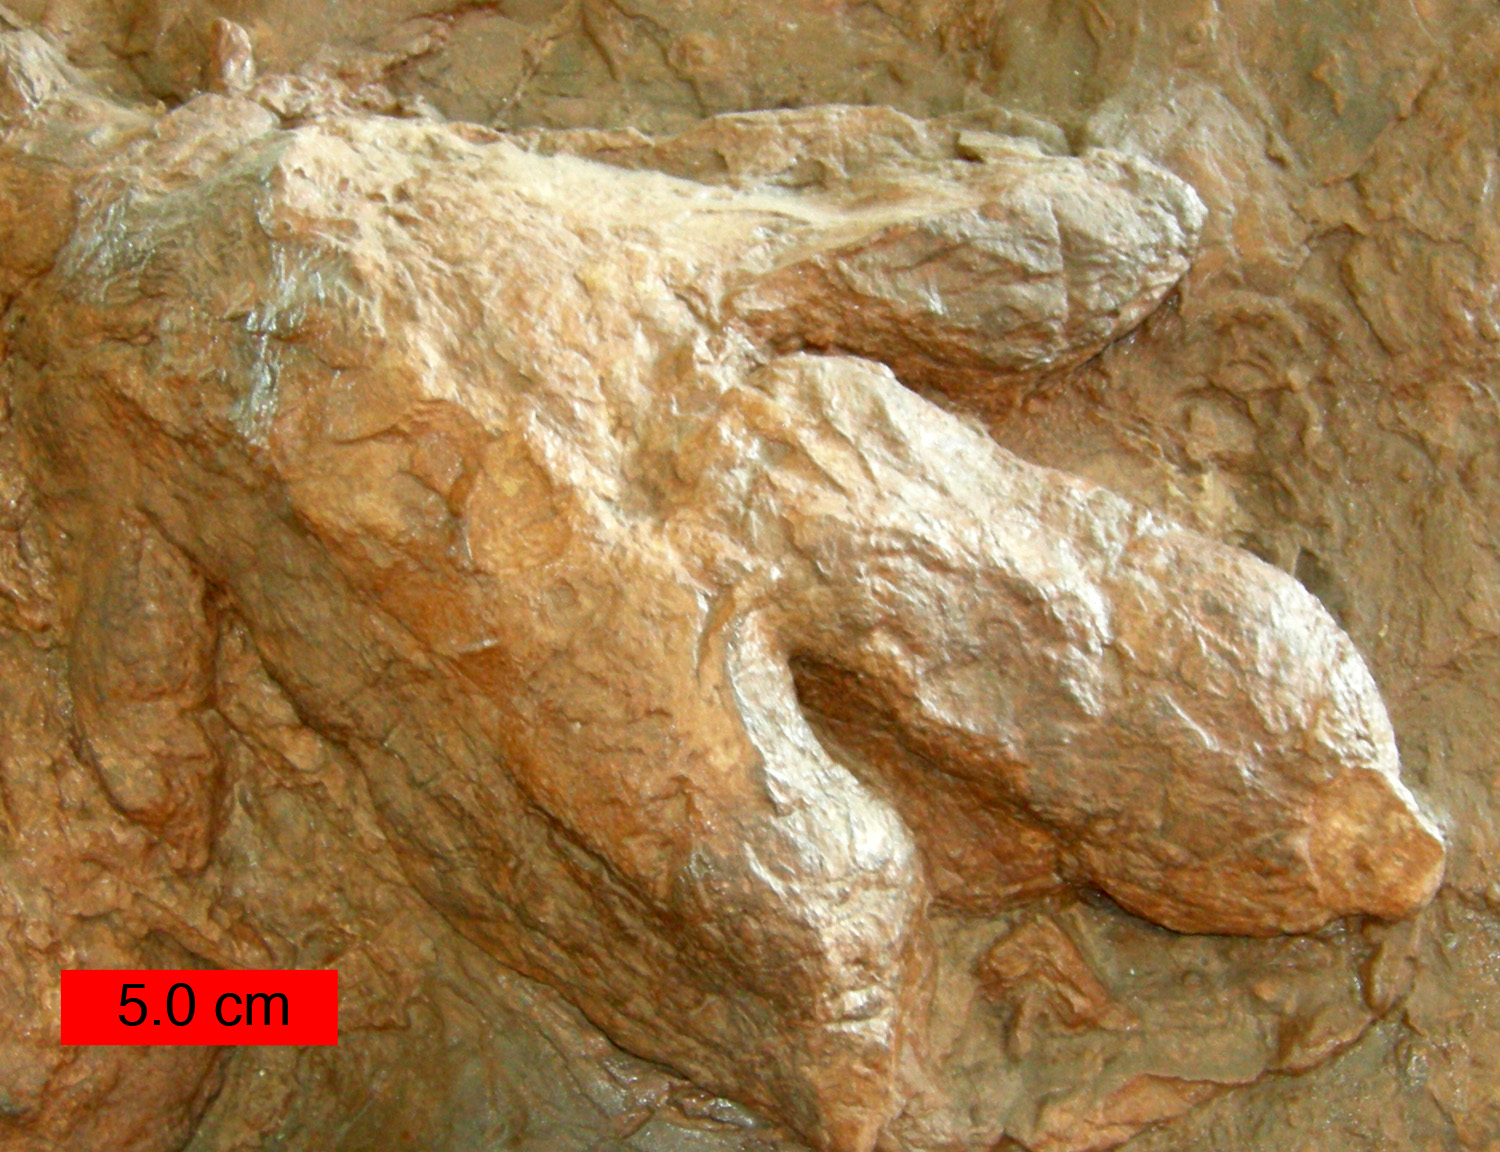 Photograph of a three-toed dinosaur footprint preserved in relief in light brown stone. The footprint is Jurassic in age. Scale bar is 5 centimeters, much shorter than the print.